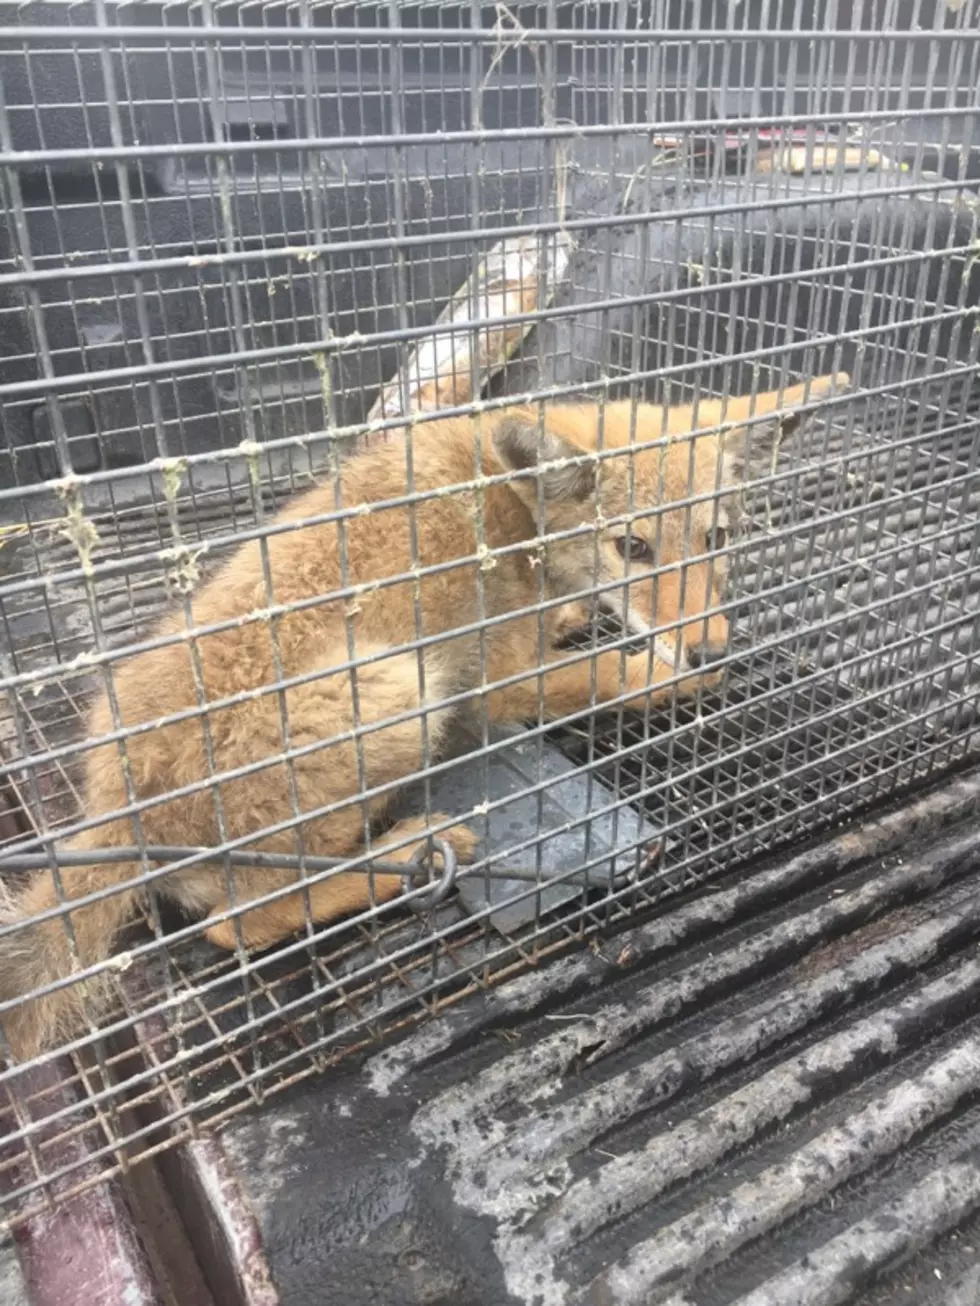 UPDATE&#8211;Coyote Found in Kennewick Home was Drowned, Says Trapper